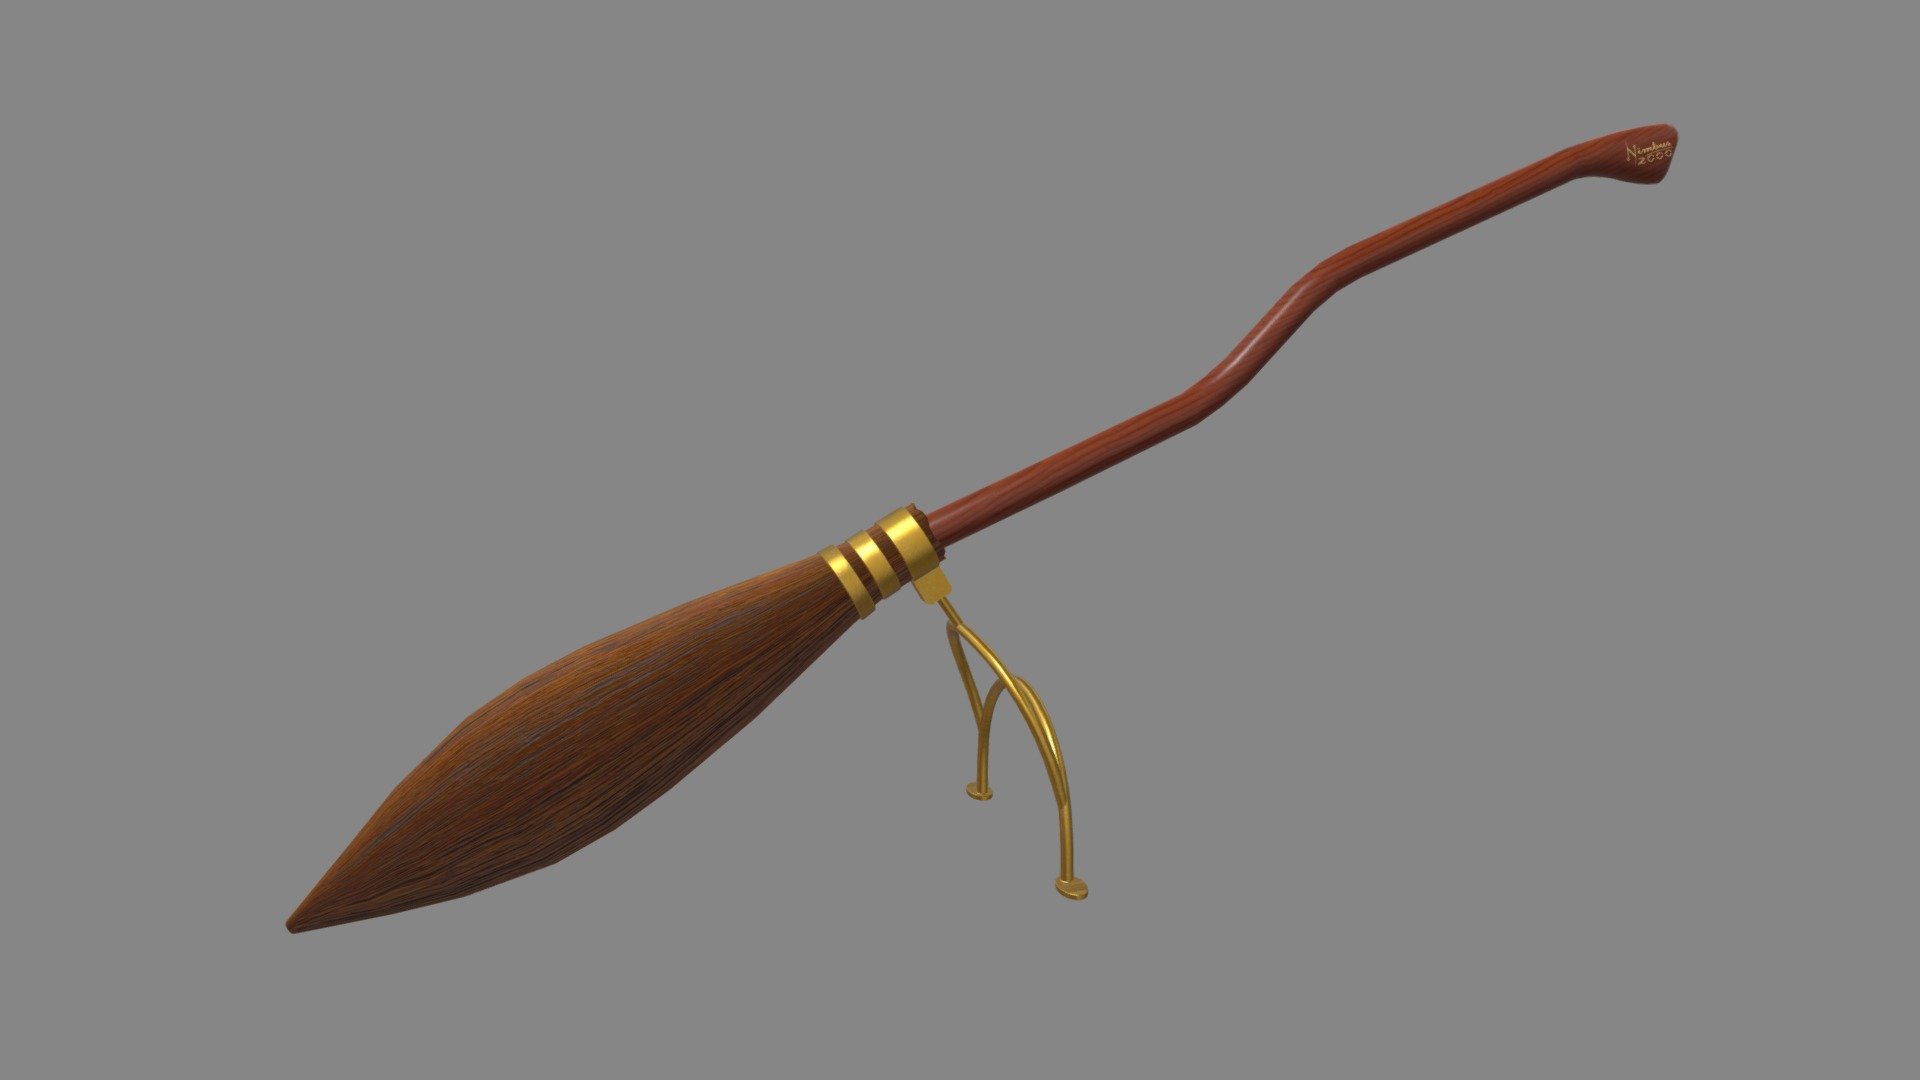 This model contains a Nimbus 2000 from the movie Harry Potter and an object based on the J.K. Rowling history which i modeled in Maya 2018. This model is perfect to create a new great scene with different object from this great fantasy world.

The model is ready as one unique part and ready for being a great CGI model and also a 3D printable model, i will add the STL model, tested for 3D printing in Ultimaker Cura. I uploaded the model in .mb, ,blend, .stl, .obj and .fbx.

If you need any kind of help contact me, i will help you with everything i can. If you like the model please give me some feedback, I would appreciate it.

Don’t doubt on contacting me, i would be very happy to help. If you experience any kind of difficulties, be sure to contact me and i will help you. Sincerely Yours, ViperJr3D - Nimbus 2000 Harry Potter - Buy Royalty Free 3D model by ViperJr3D 3d model